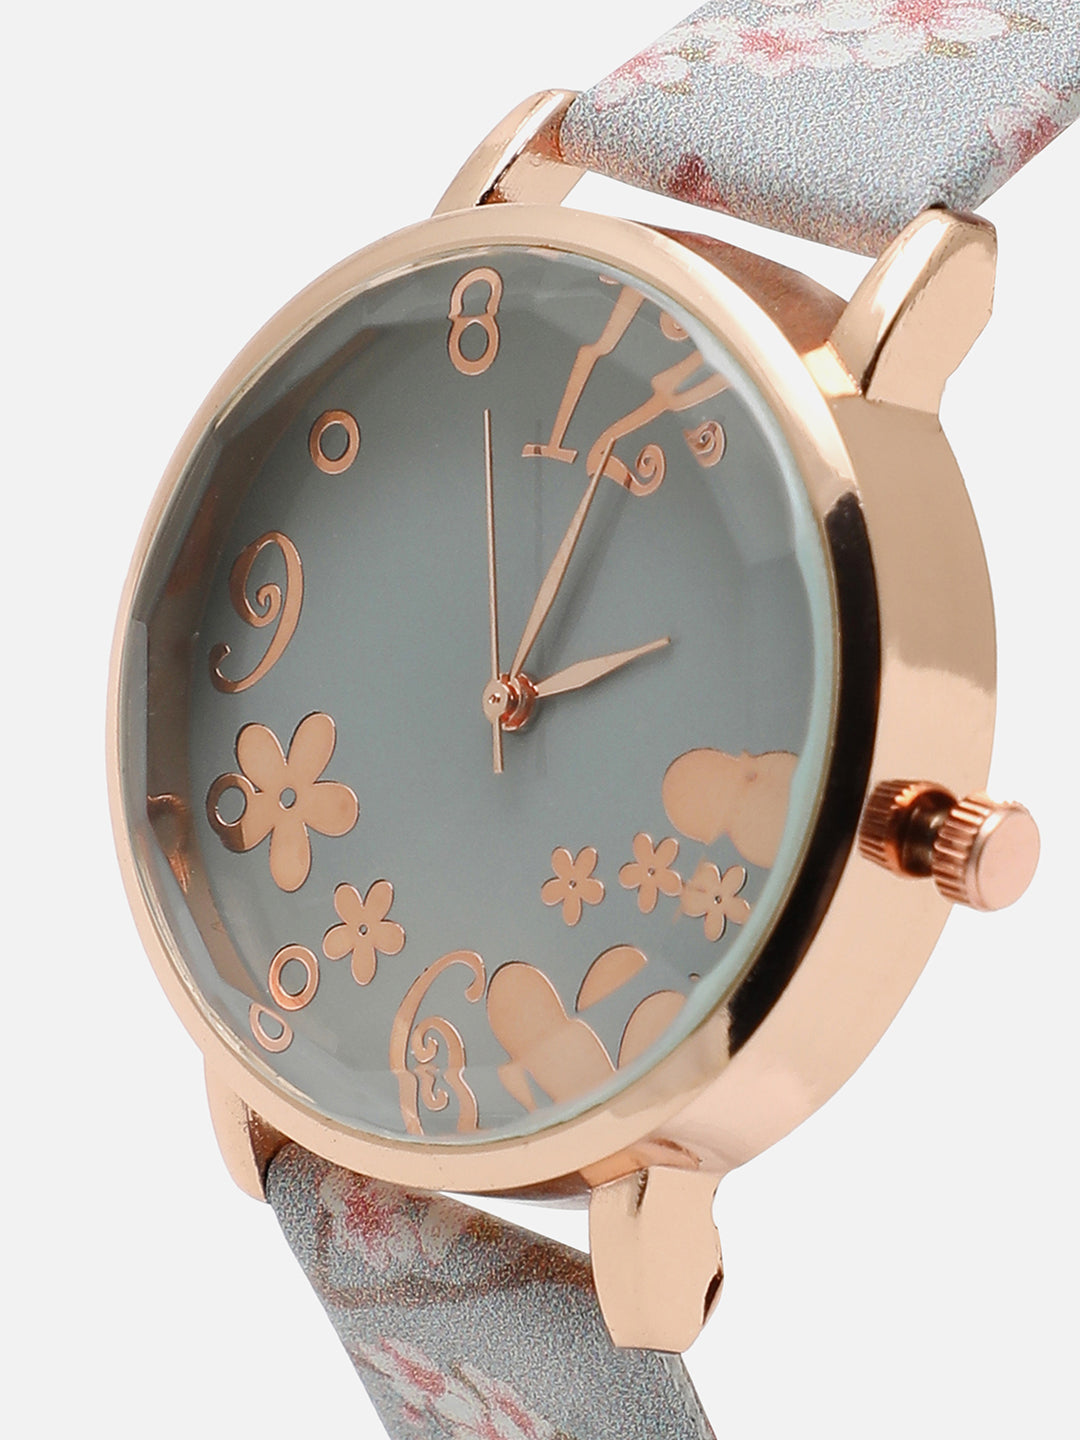 Grey Decorative Analog Round Dial With Floral Printed Leather Strap Watch & Bracelets